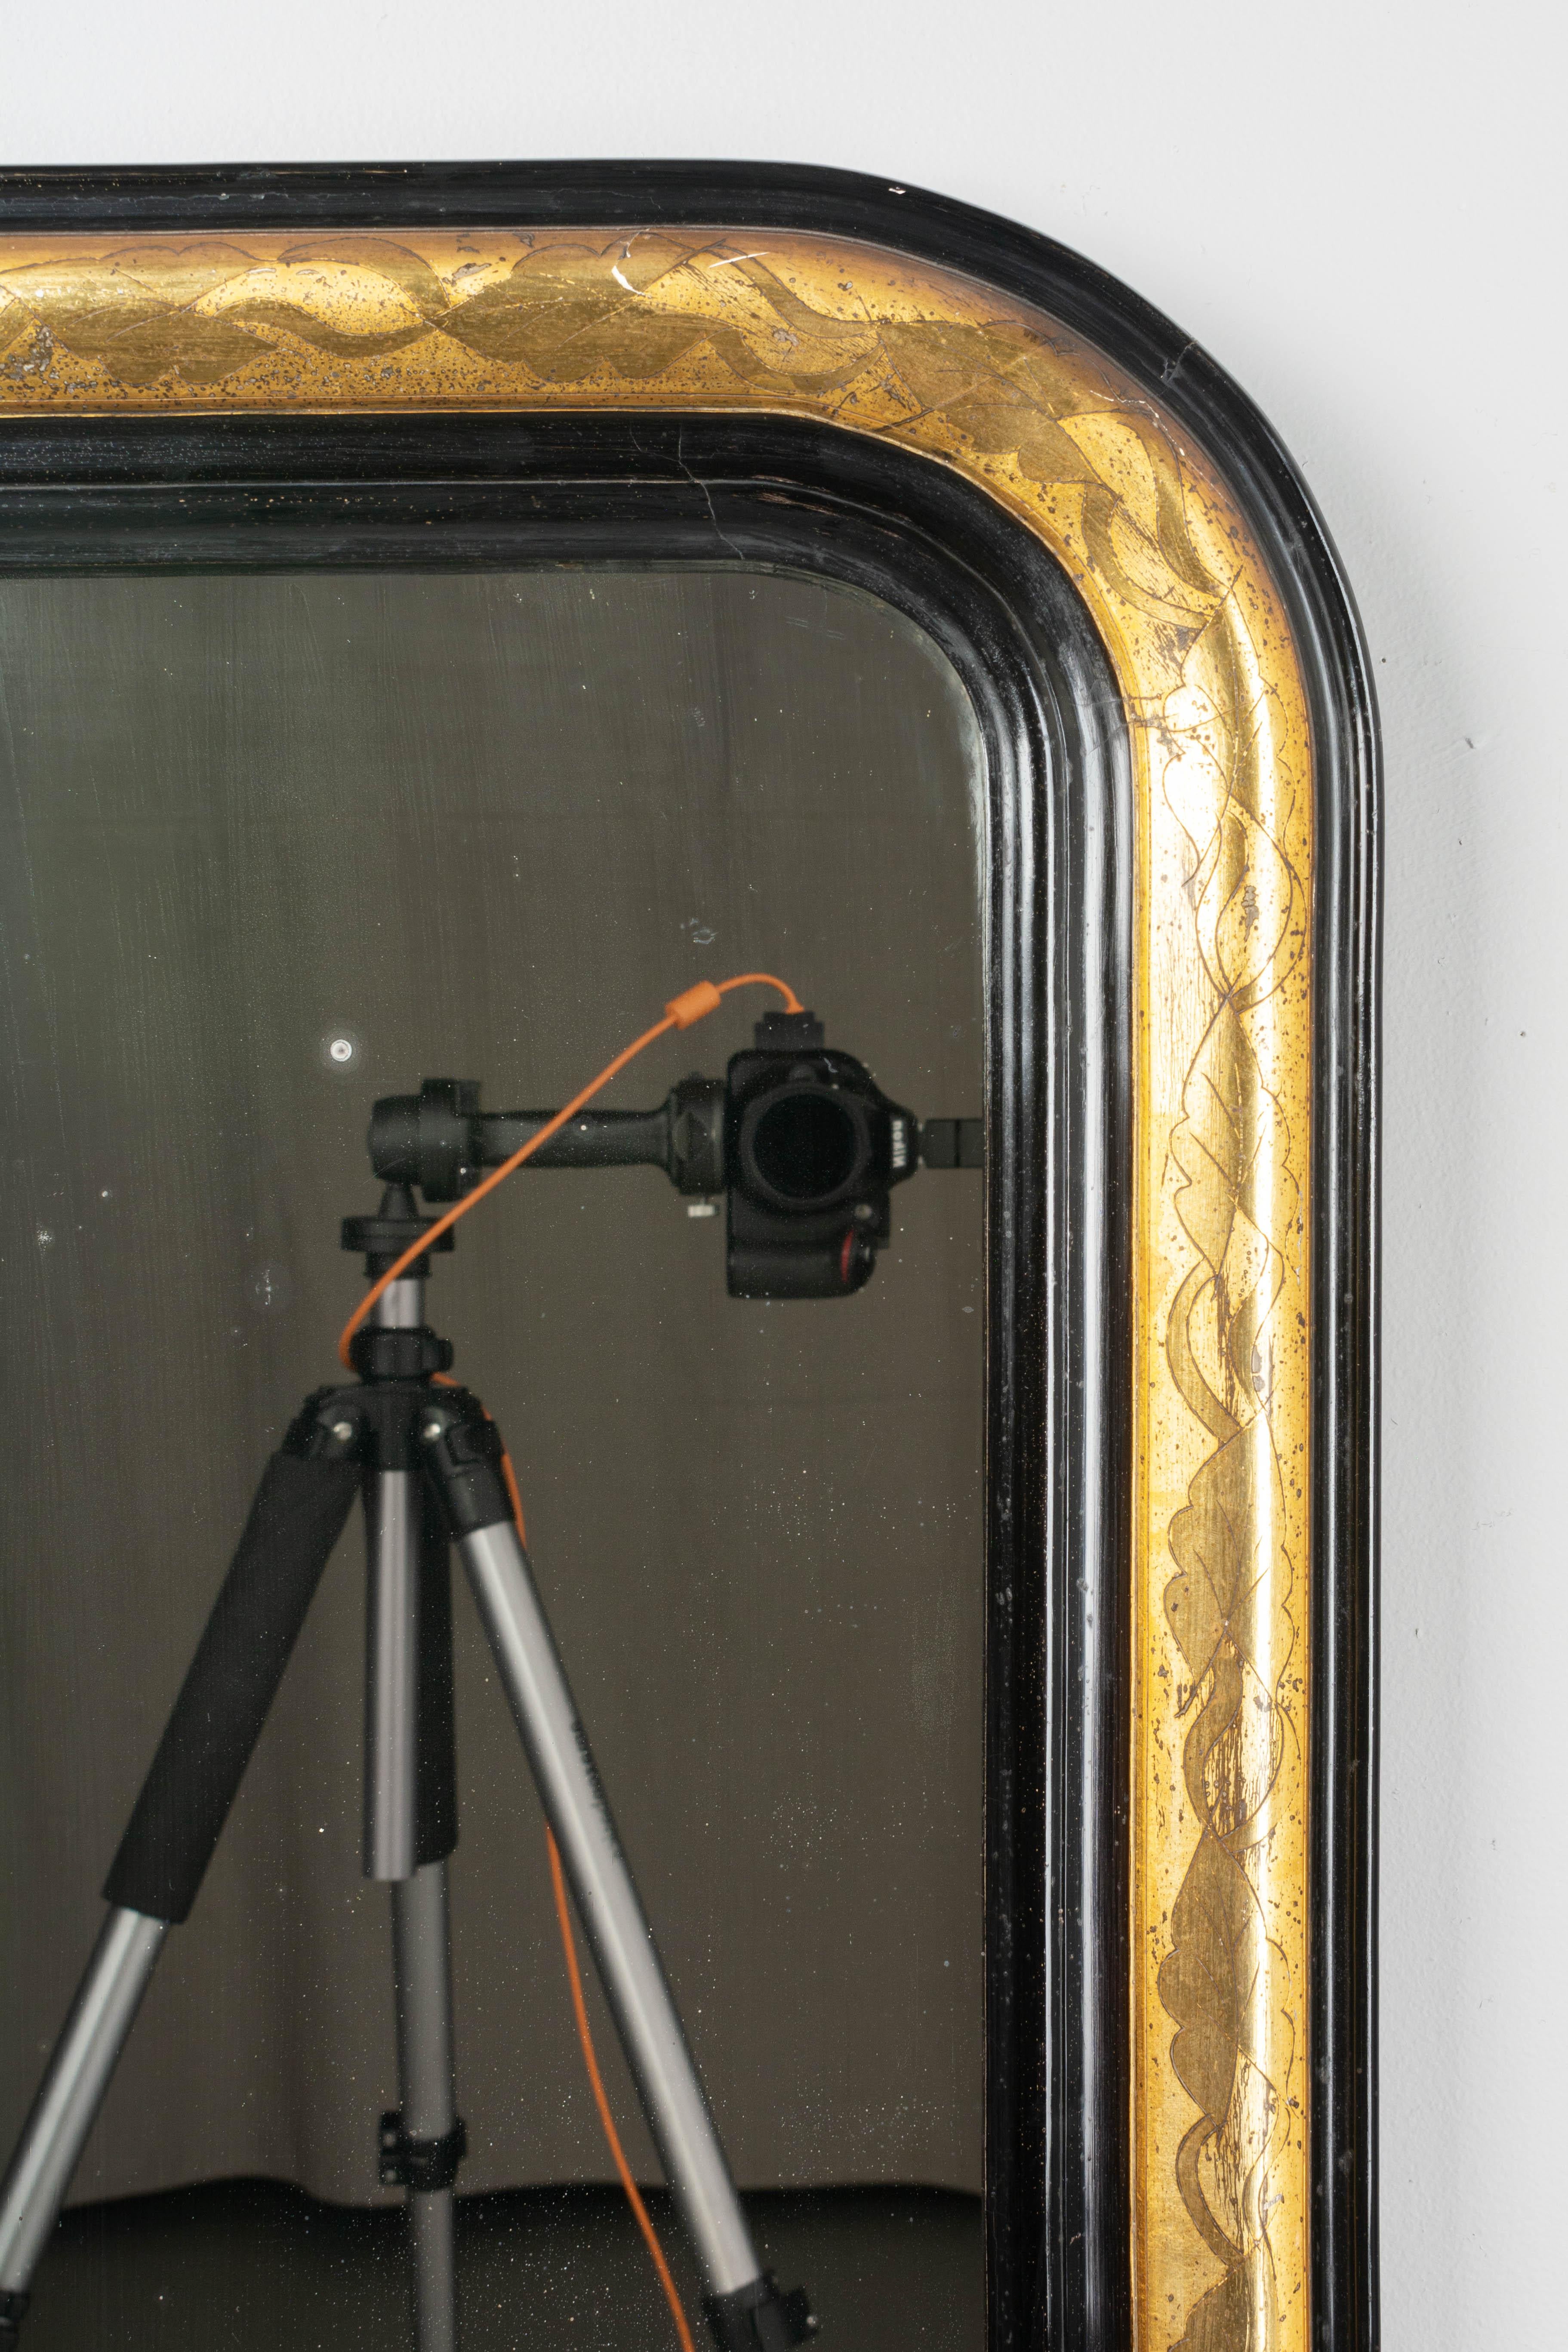 A 19th century Louis Philippe French mirror with curved top corners. Ebonized and gilded finish with incised decoration. In good condition with bright gilt finish. Original mirror with old silvering. Frame has minor repair to bottom